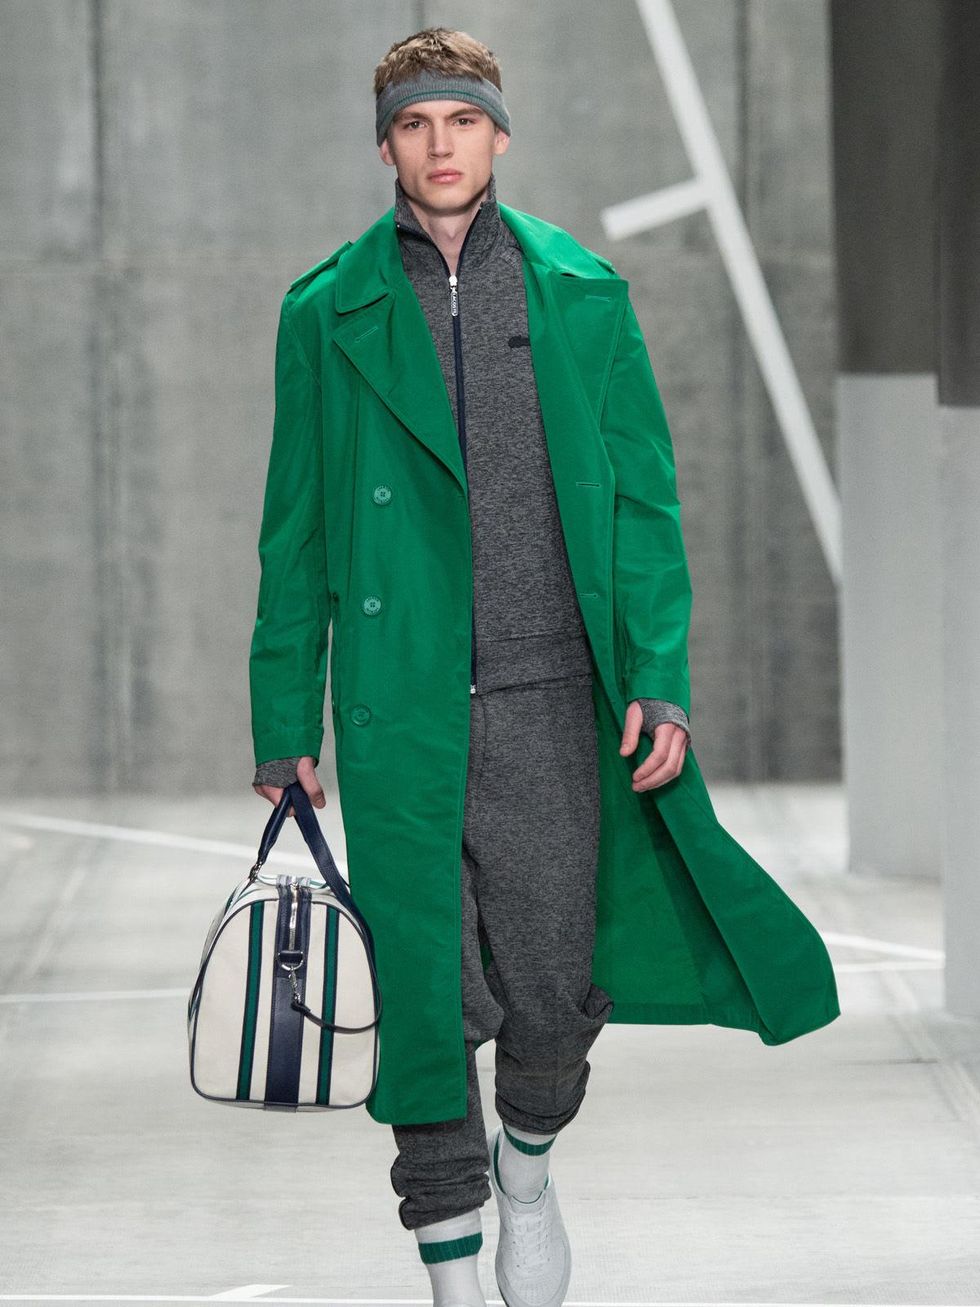 Clifford New York Fashion Week fall 2015 Lacoste April 2015 Look_021